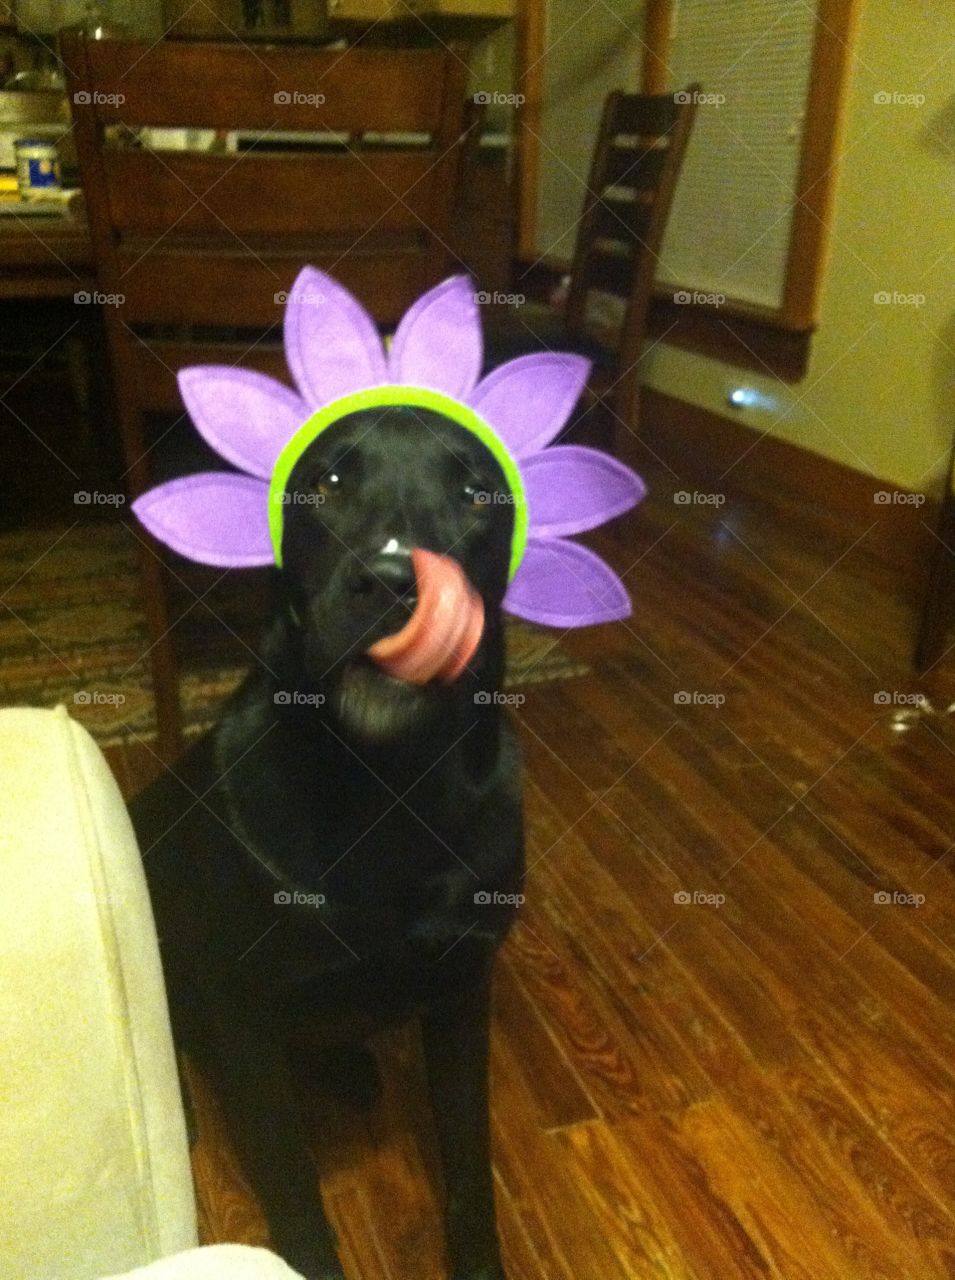 Dogs are better dressed as flowers!